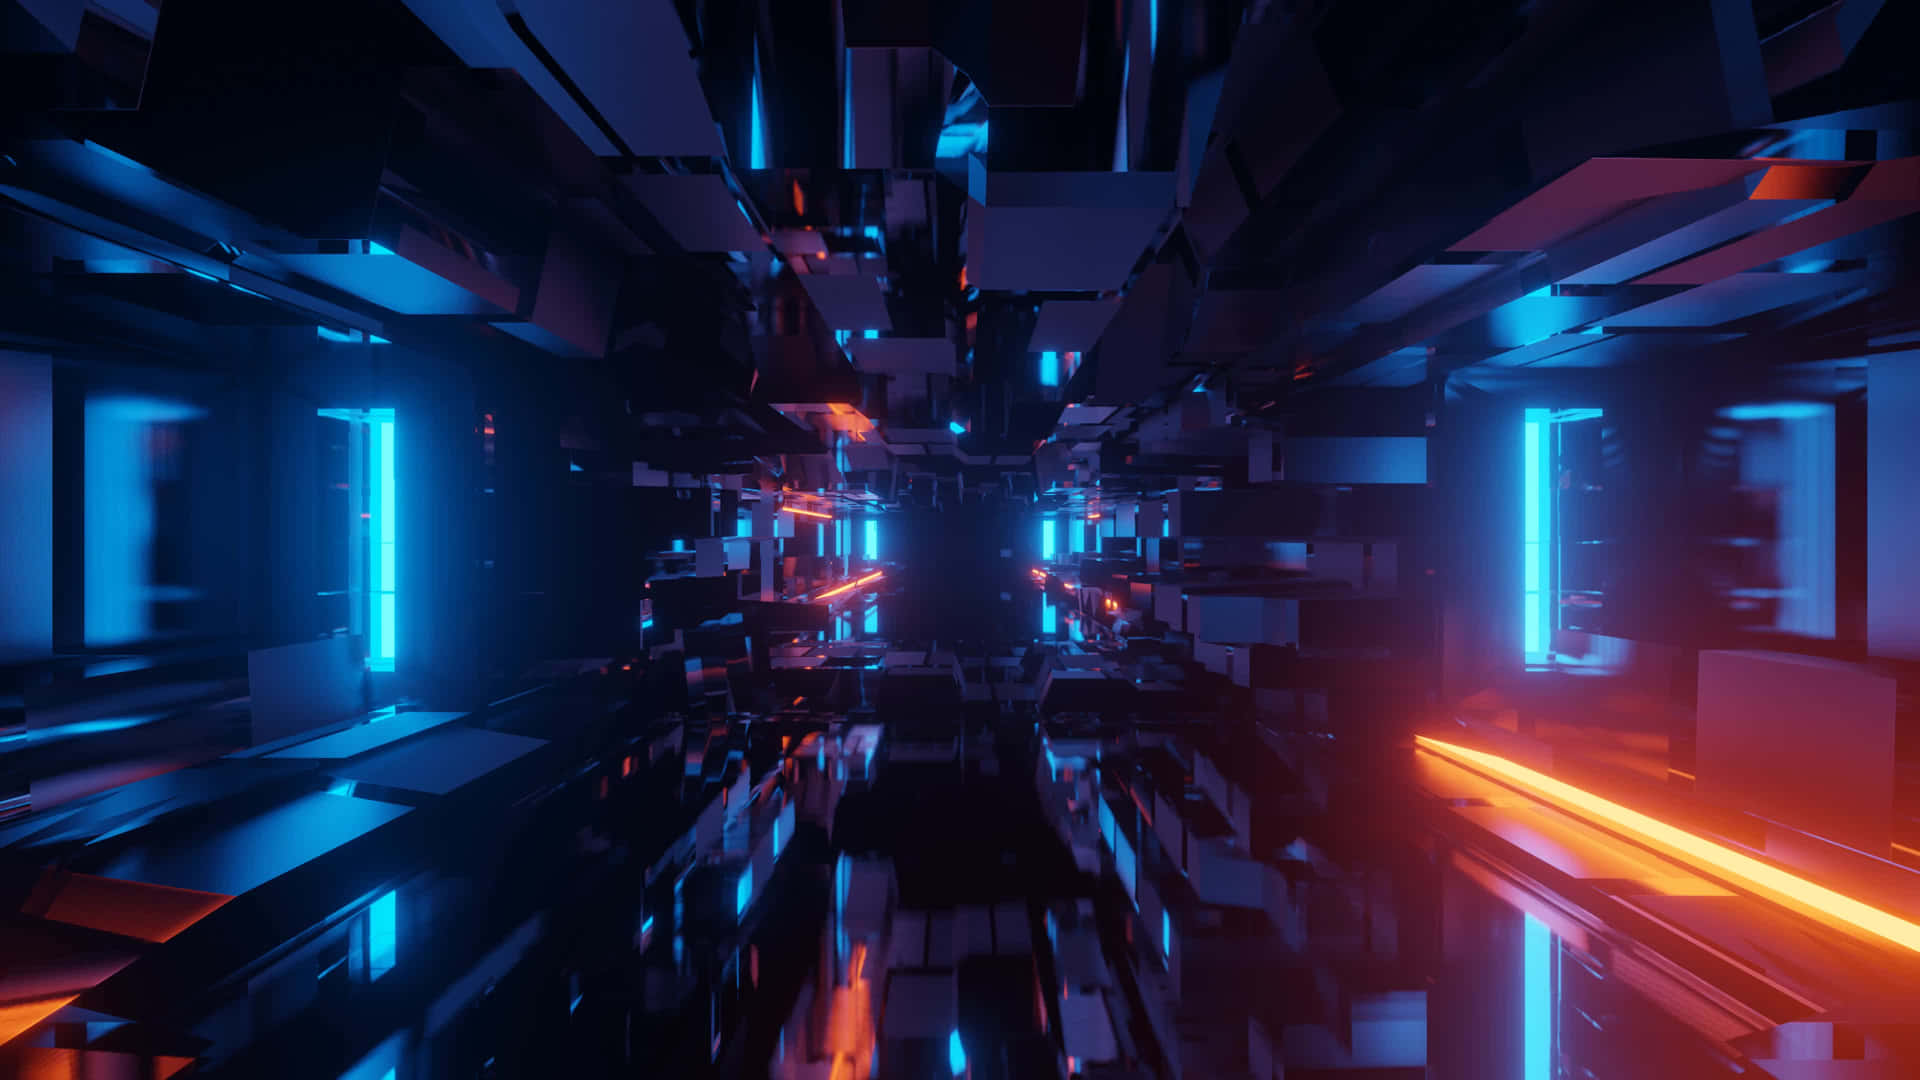 A Futuristic Tunnel With Neon Lights And A Blue Light